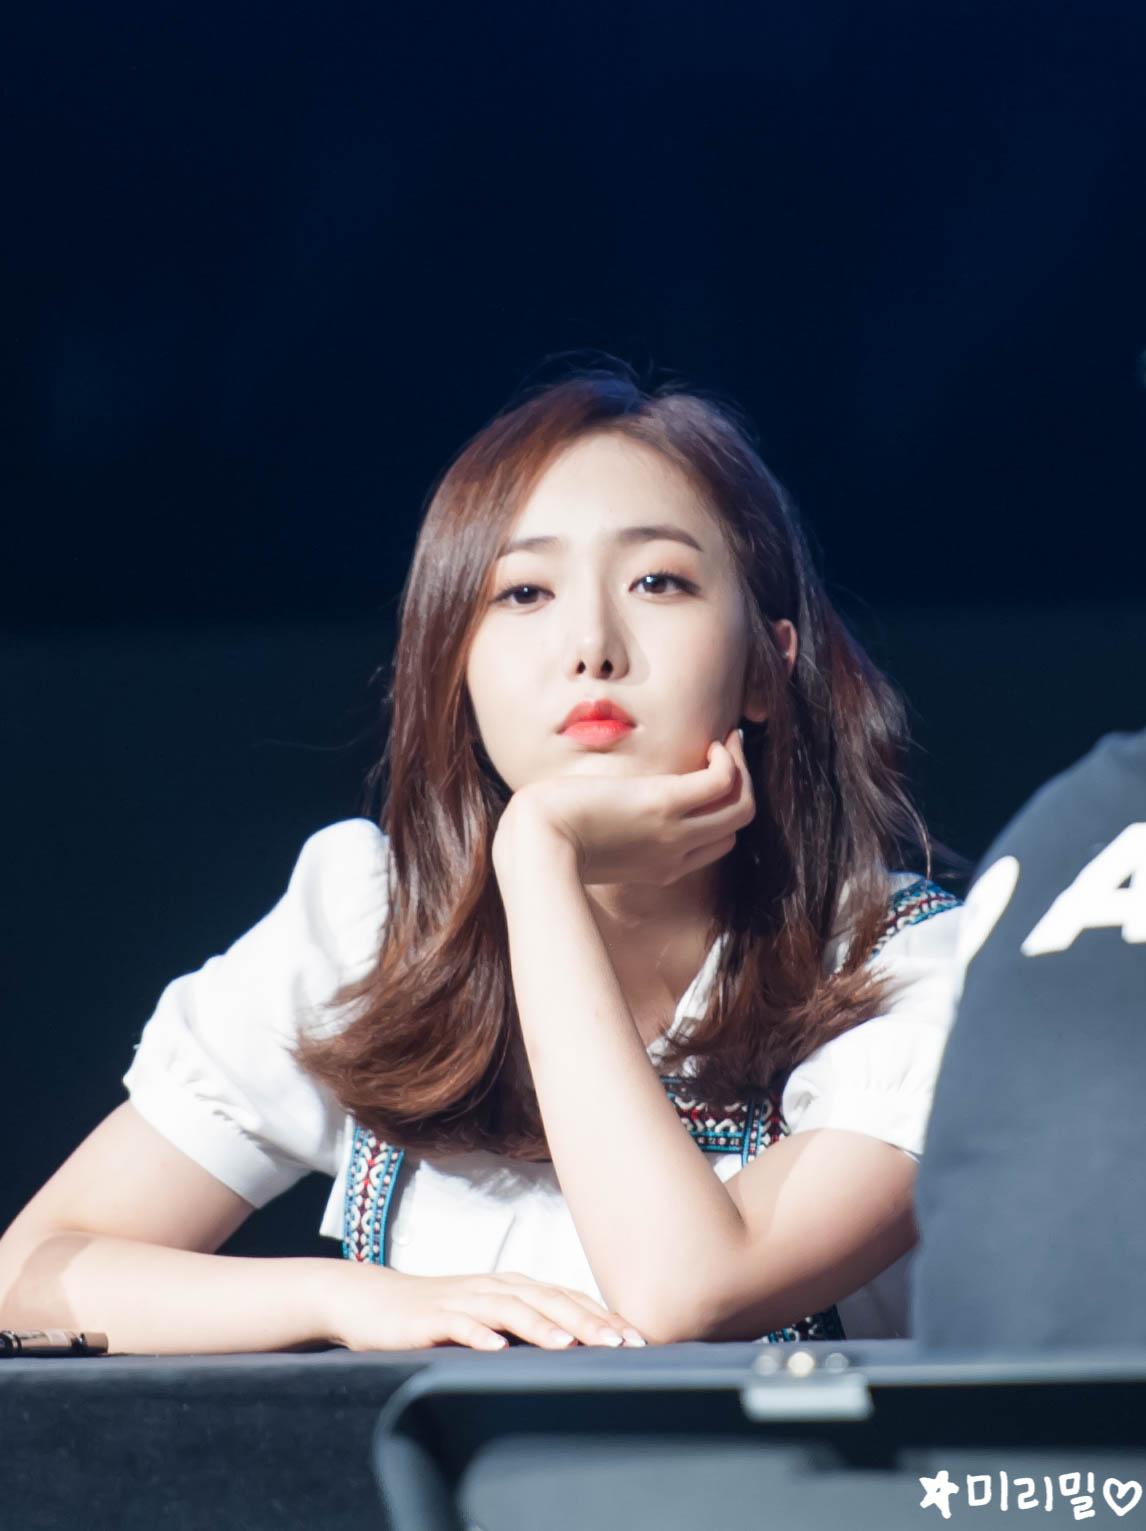 SinB Android IPhone Wallpaper KPOP Image Board